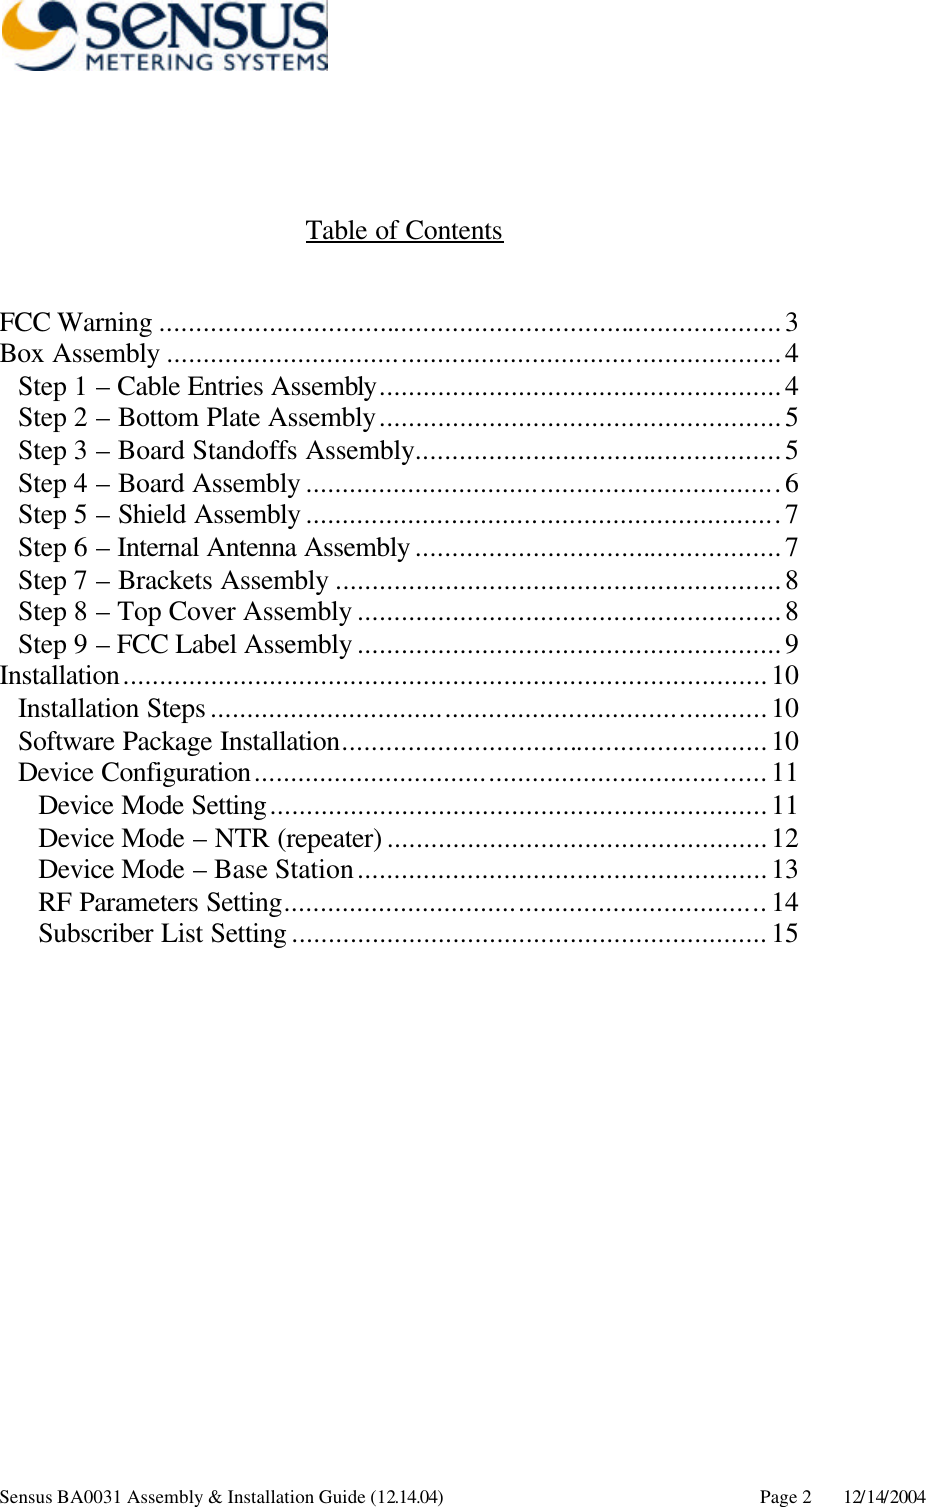      Sensus BA0031 Assembly &amp; Installation Guide (12.14.04) Page 2 12/14/2004    Table of Contents   FCC Warning .....................................................................................3 Box Assembly ....................................................................................4 Step 1 – Cable Entries Assembly.......................................................4 Step 2 – Bottom Plate Assembly.......................................................5 Step 3 – Board Standoffs Assembly..................................................5 Step 4 – Board Assembly .................................................................6 Step 5 – Shield Assembly .................................................................7 Step 6 – Internal Antenna Assembly ..................................................7 Step 7 – Brackets Assembly .............................................................8 Step 8 – Top Cover Assembly ..........................................................8 Step 9 – FCC Label Assembly ..........................................................9 Installation........................................................................................10 Installation Steps ............................................................................10 Software Package Installation..........................................................10 Device Configuration......................................................................11 Device Mode Setting....................................................................11 Device Mode – NTR (repeater) ....................................................12 Device Mode – Base Station........................................................13 RF Parameters Setting..................................................................14 Subscriber List Setting .................................................................15 